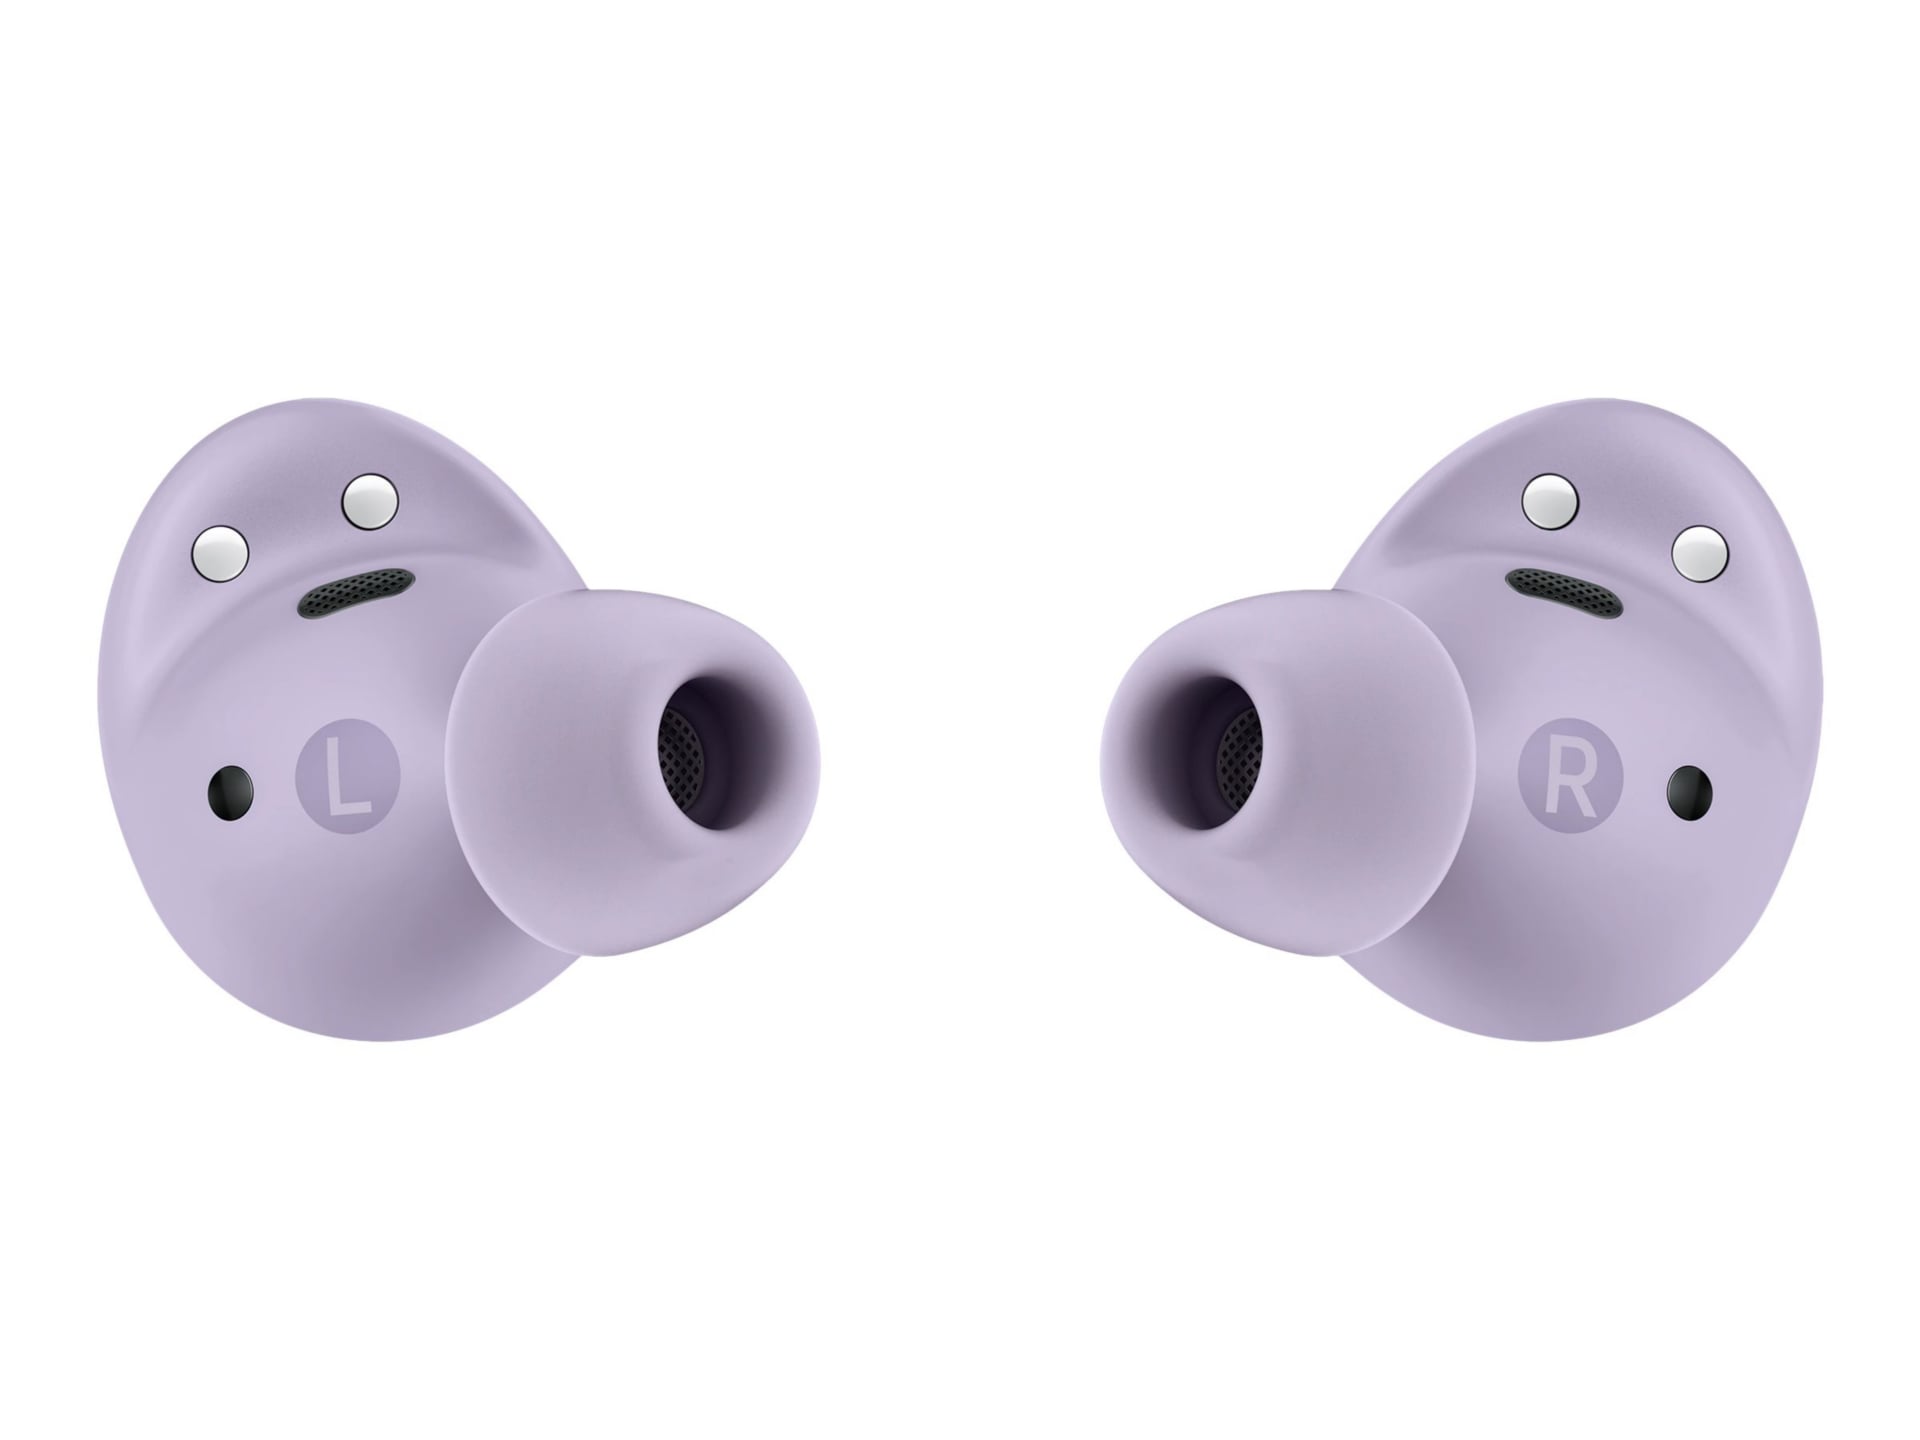  SAMSUNG Galaxy Buds Pro True Wireless Bluetooth Earbuds w/  Noise Cancelling, Charging Case, Quality Sound, Water Resistant, Long  Battery Life, Touch Control, US Version, White : Electronics